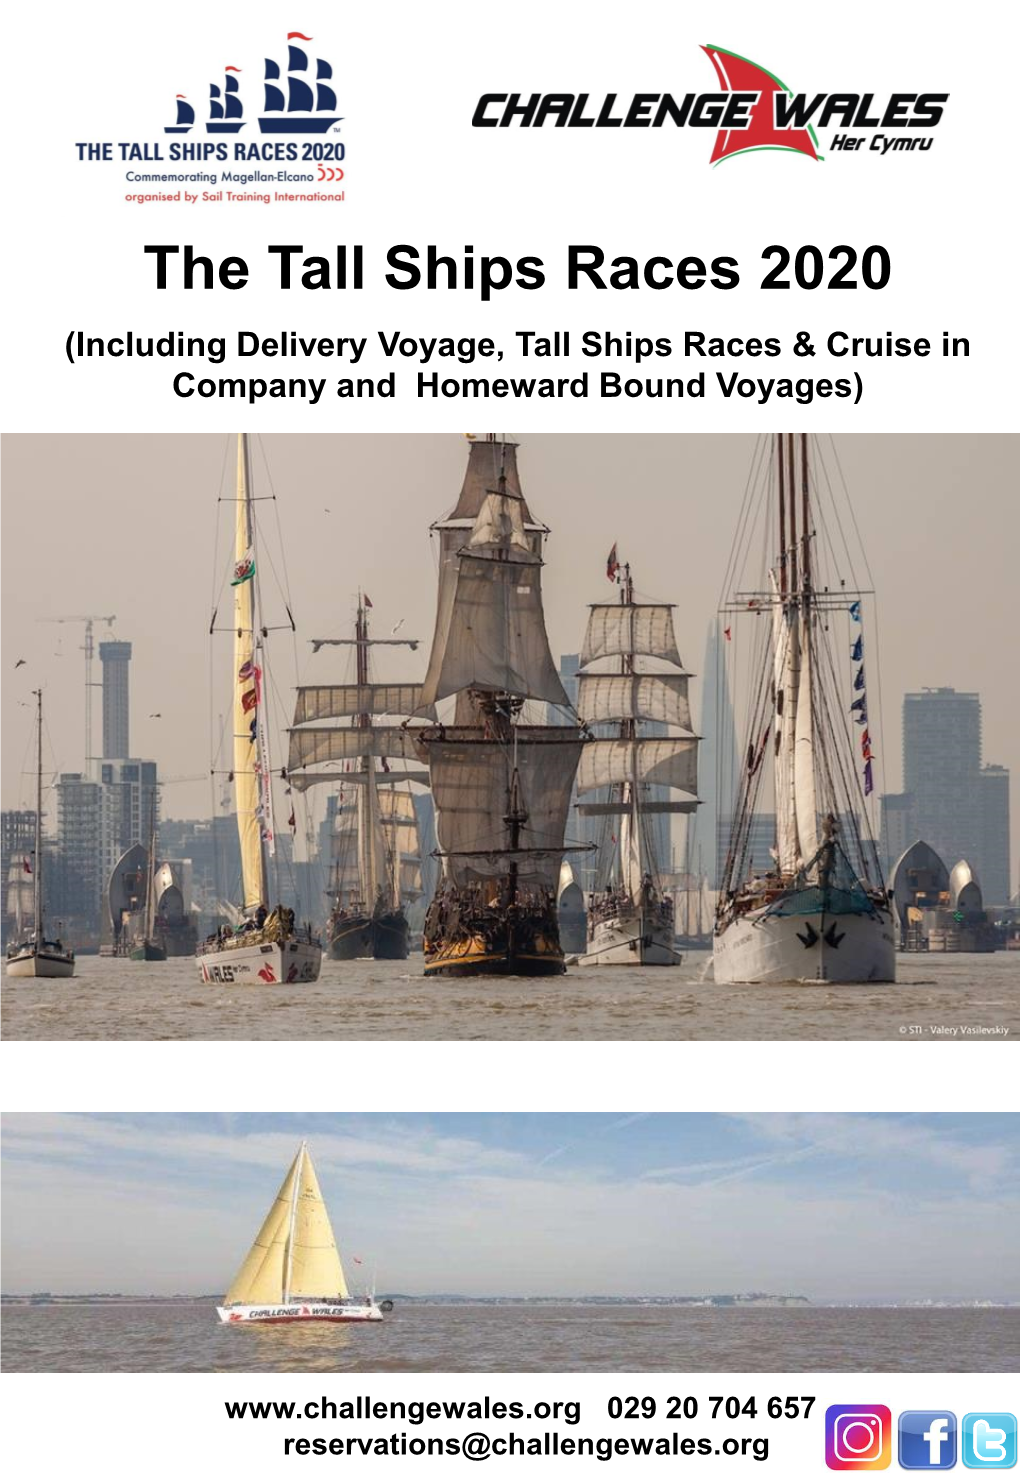 The Tall Ships Races 2020 (Including Delivery Voyage, Tall Ships Races & Cruise in Company and Homeward Bound Voyages)